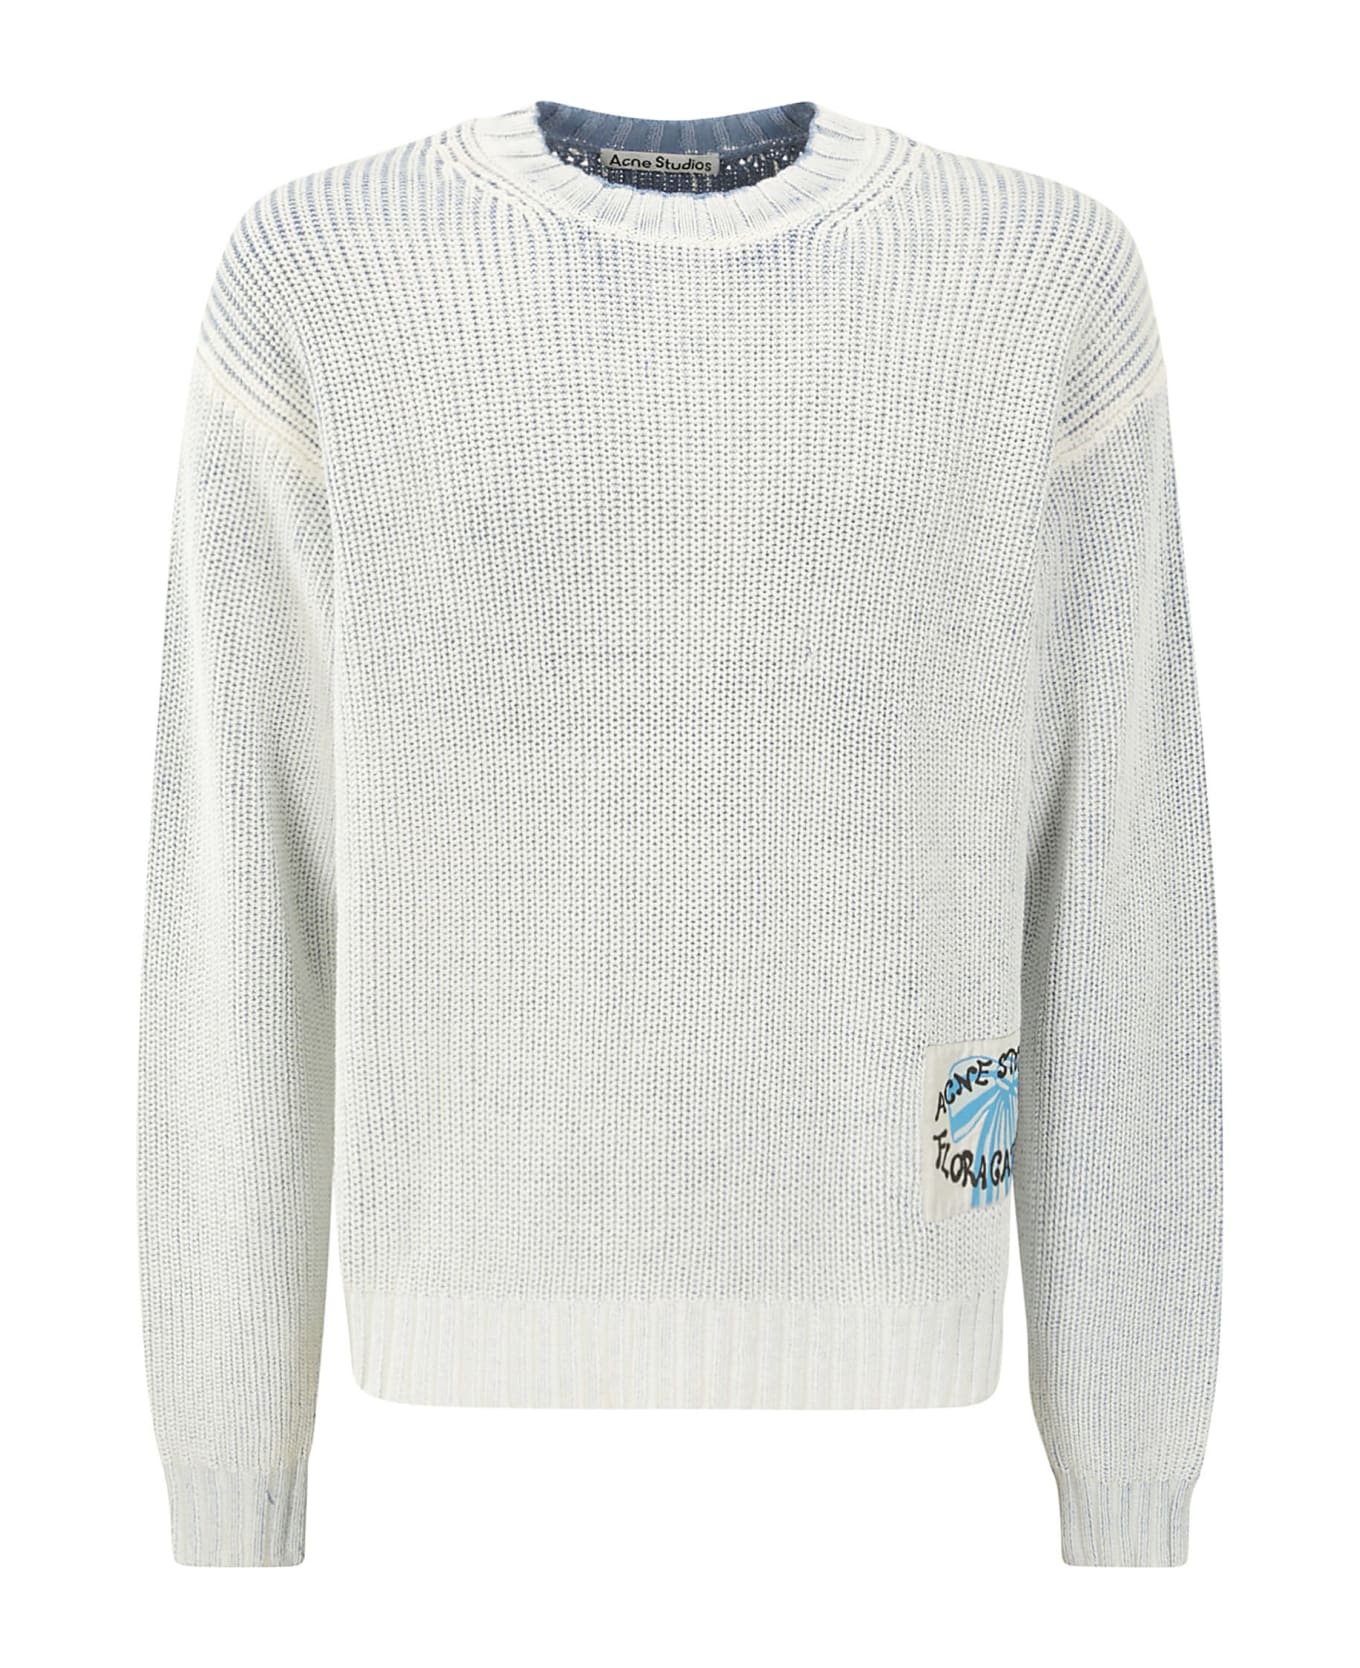 Acne Studios Logo Patch Knitted Jumper - OLD BLUE/WHITE